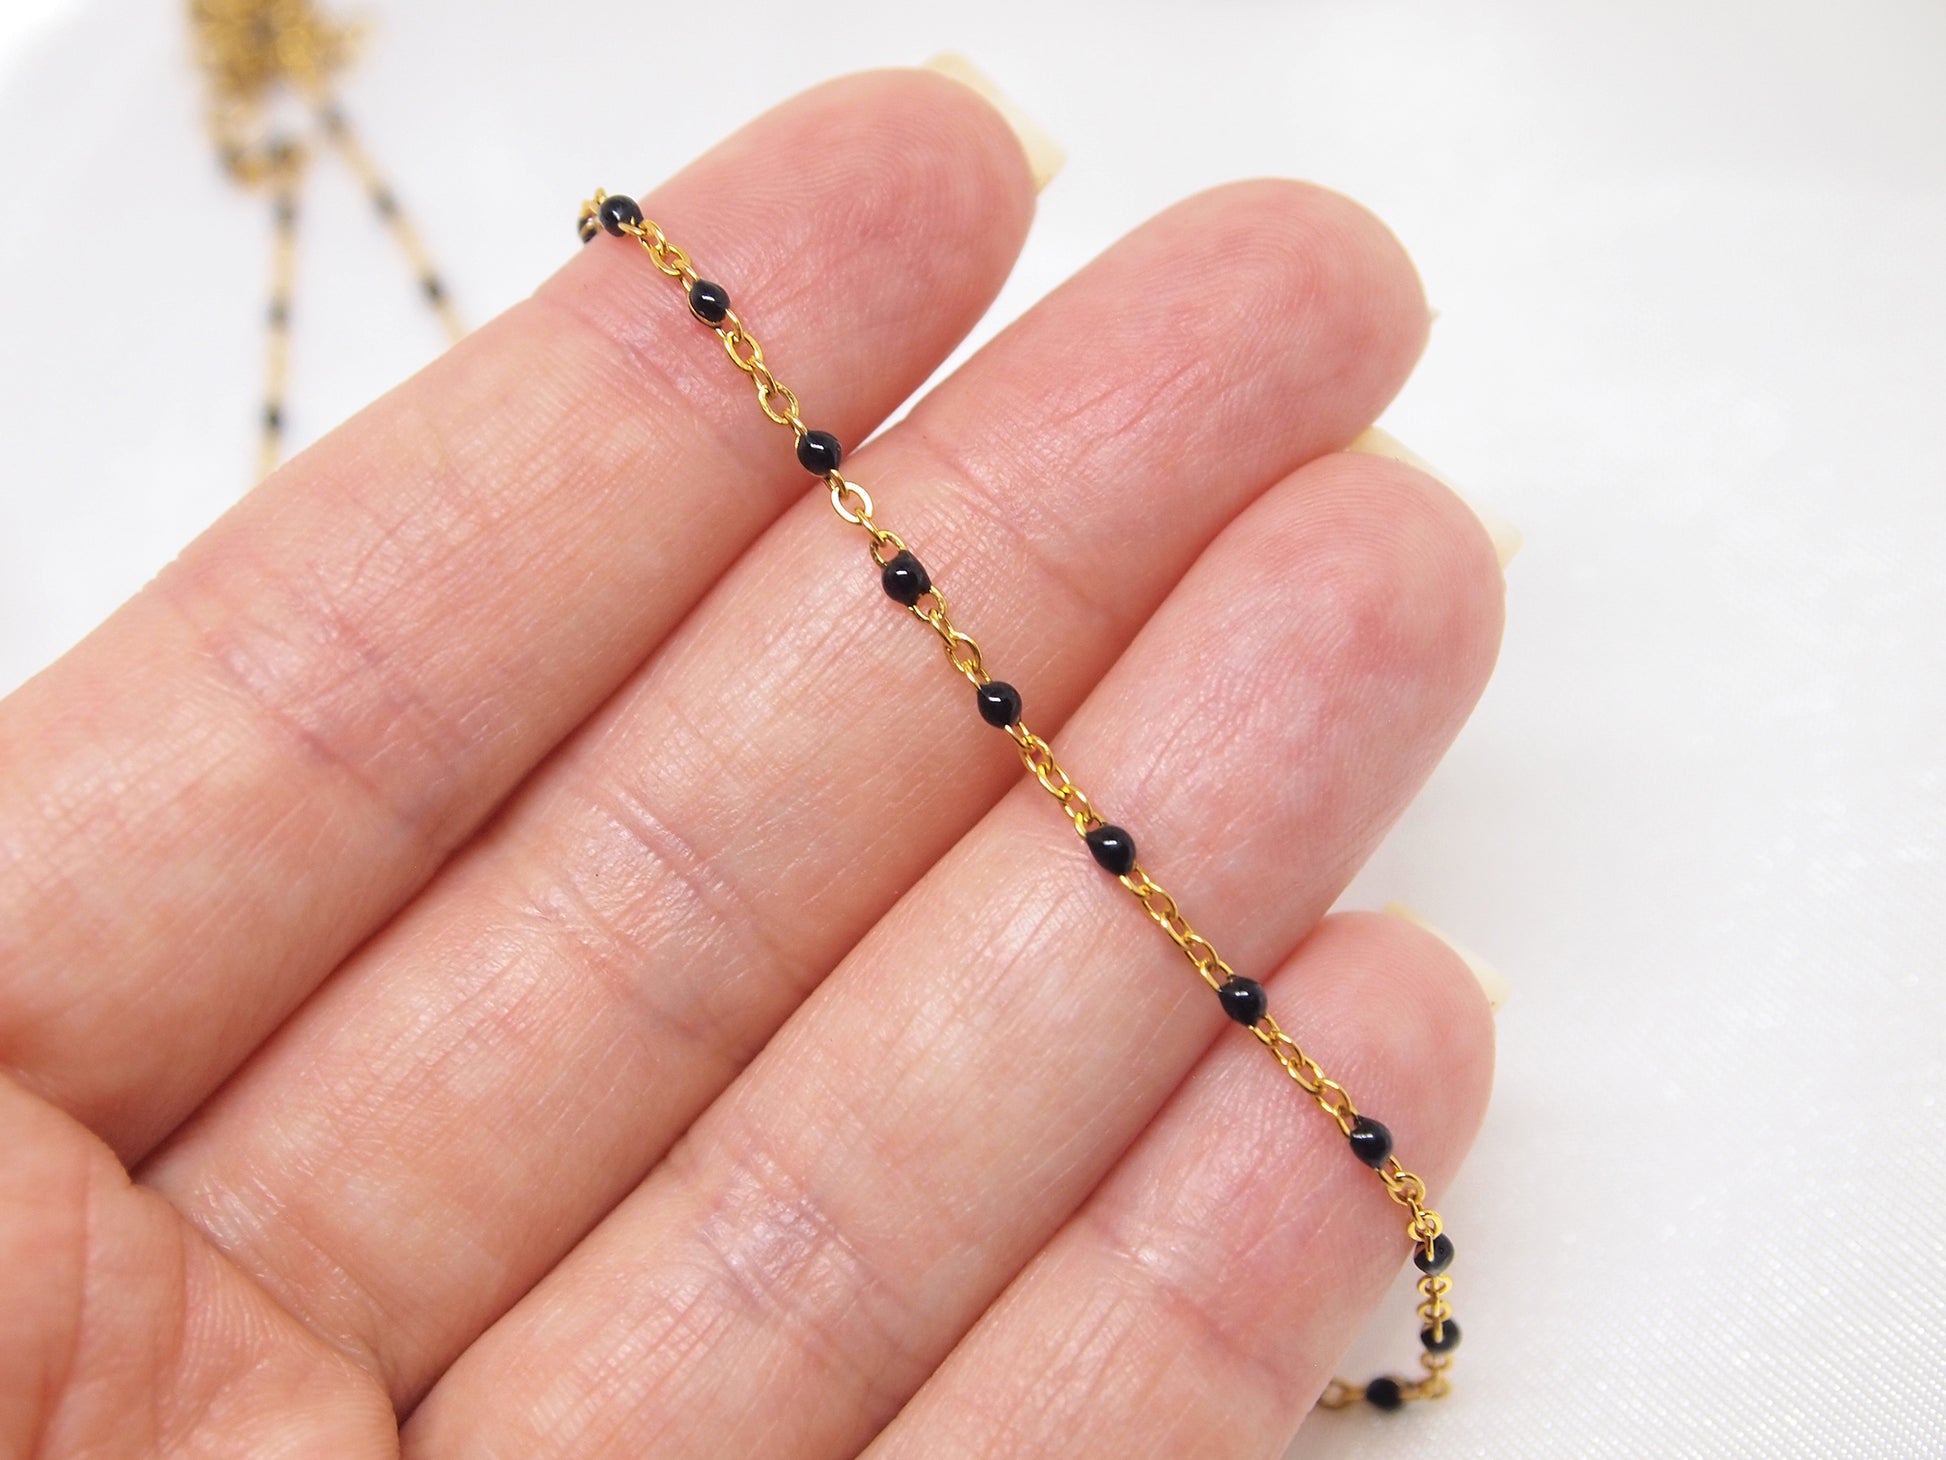 rosary chain necklace with enamel beads